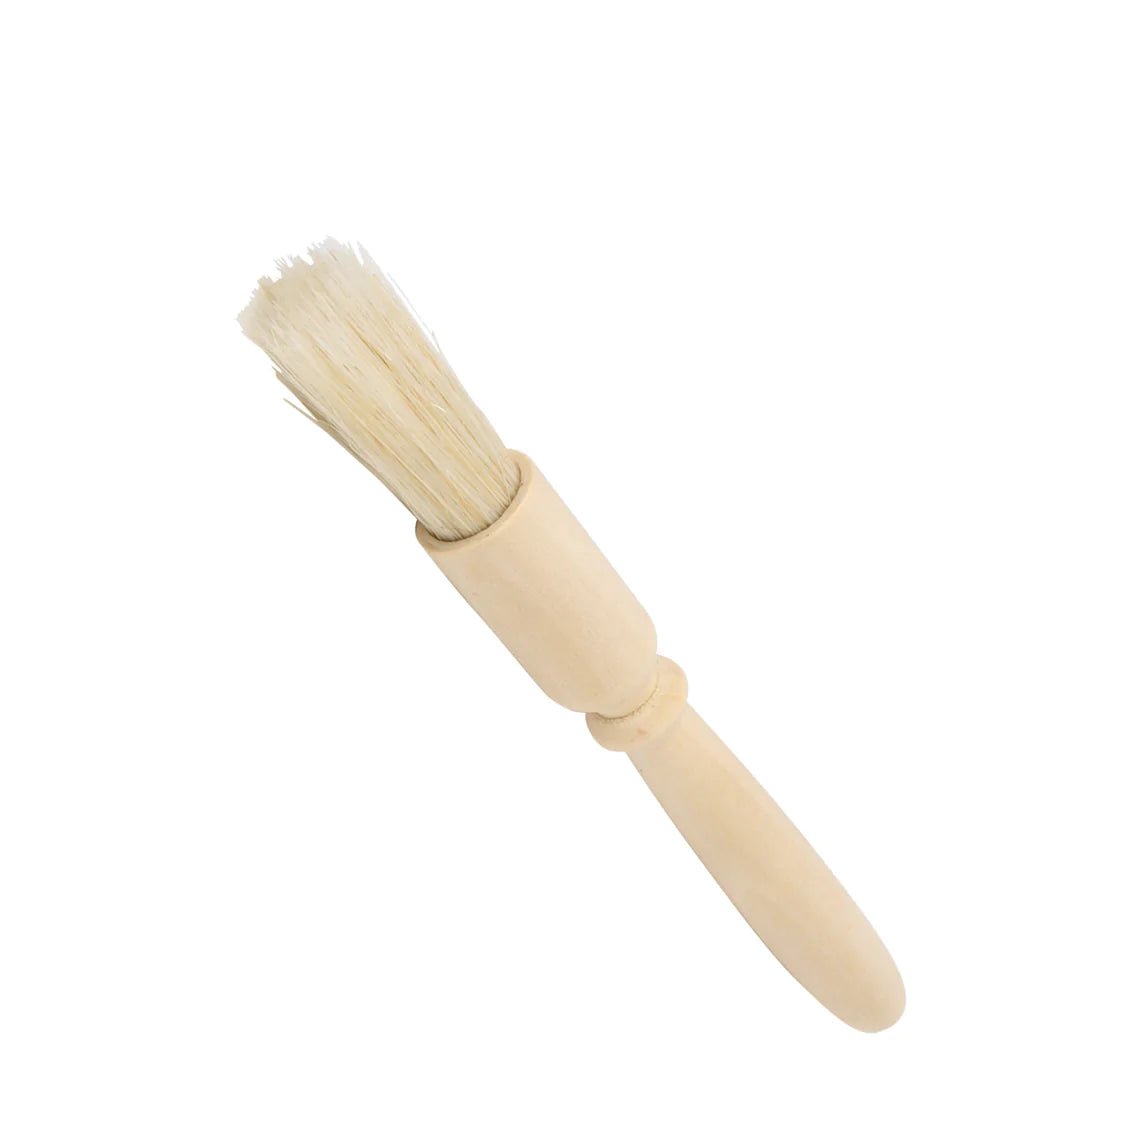 Round Pastry Baking Brush by Redecker